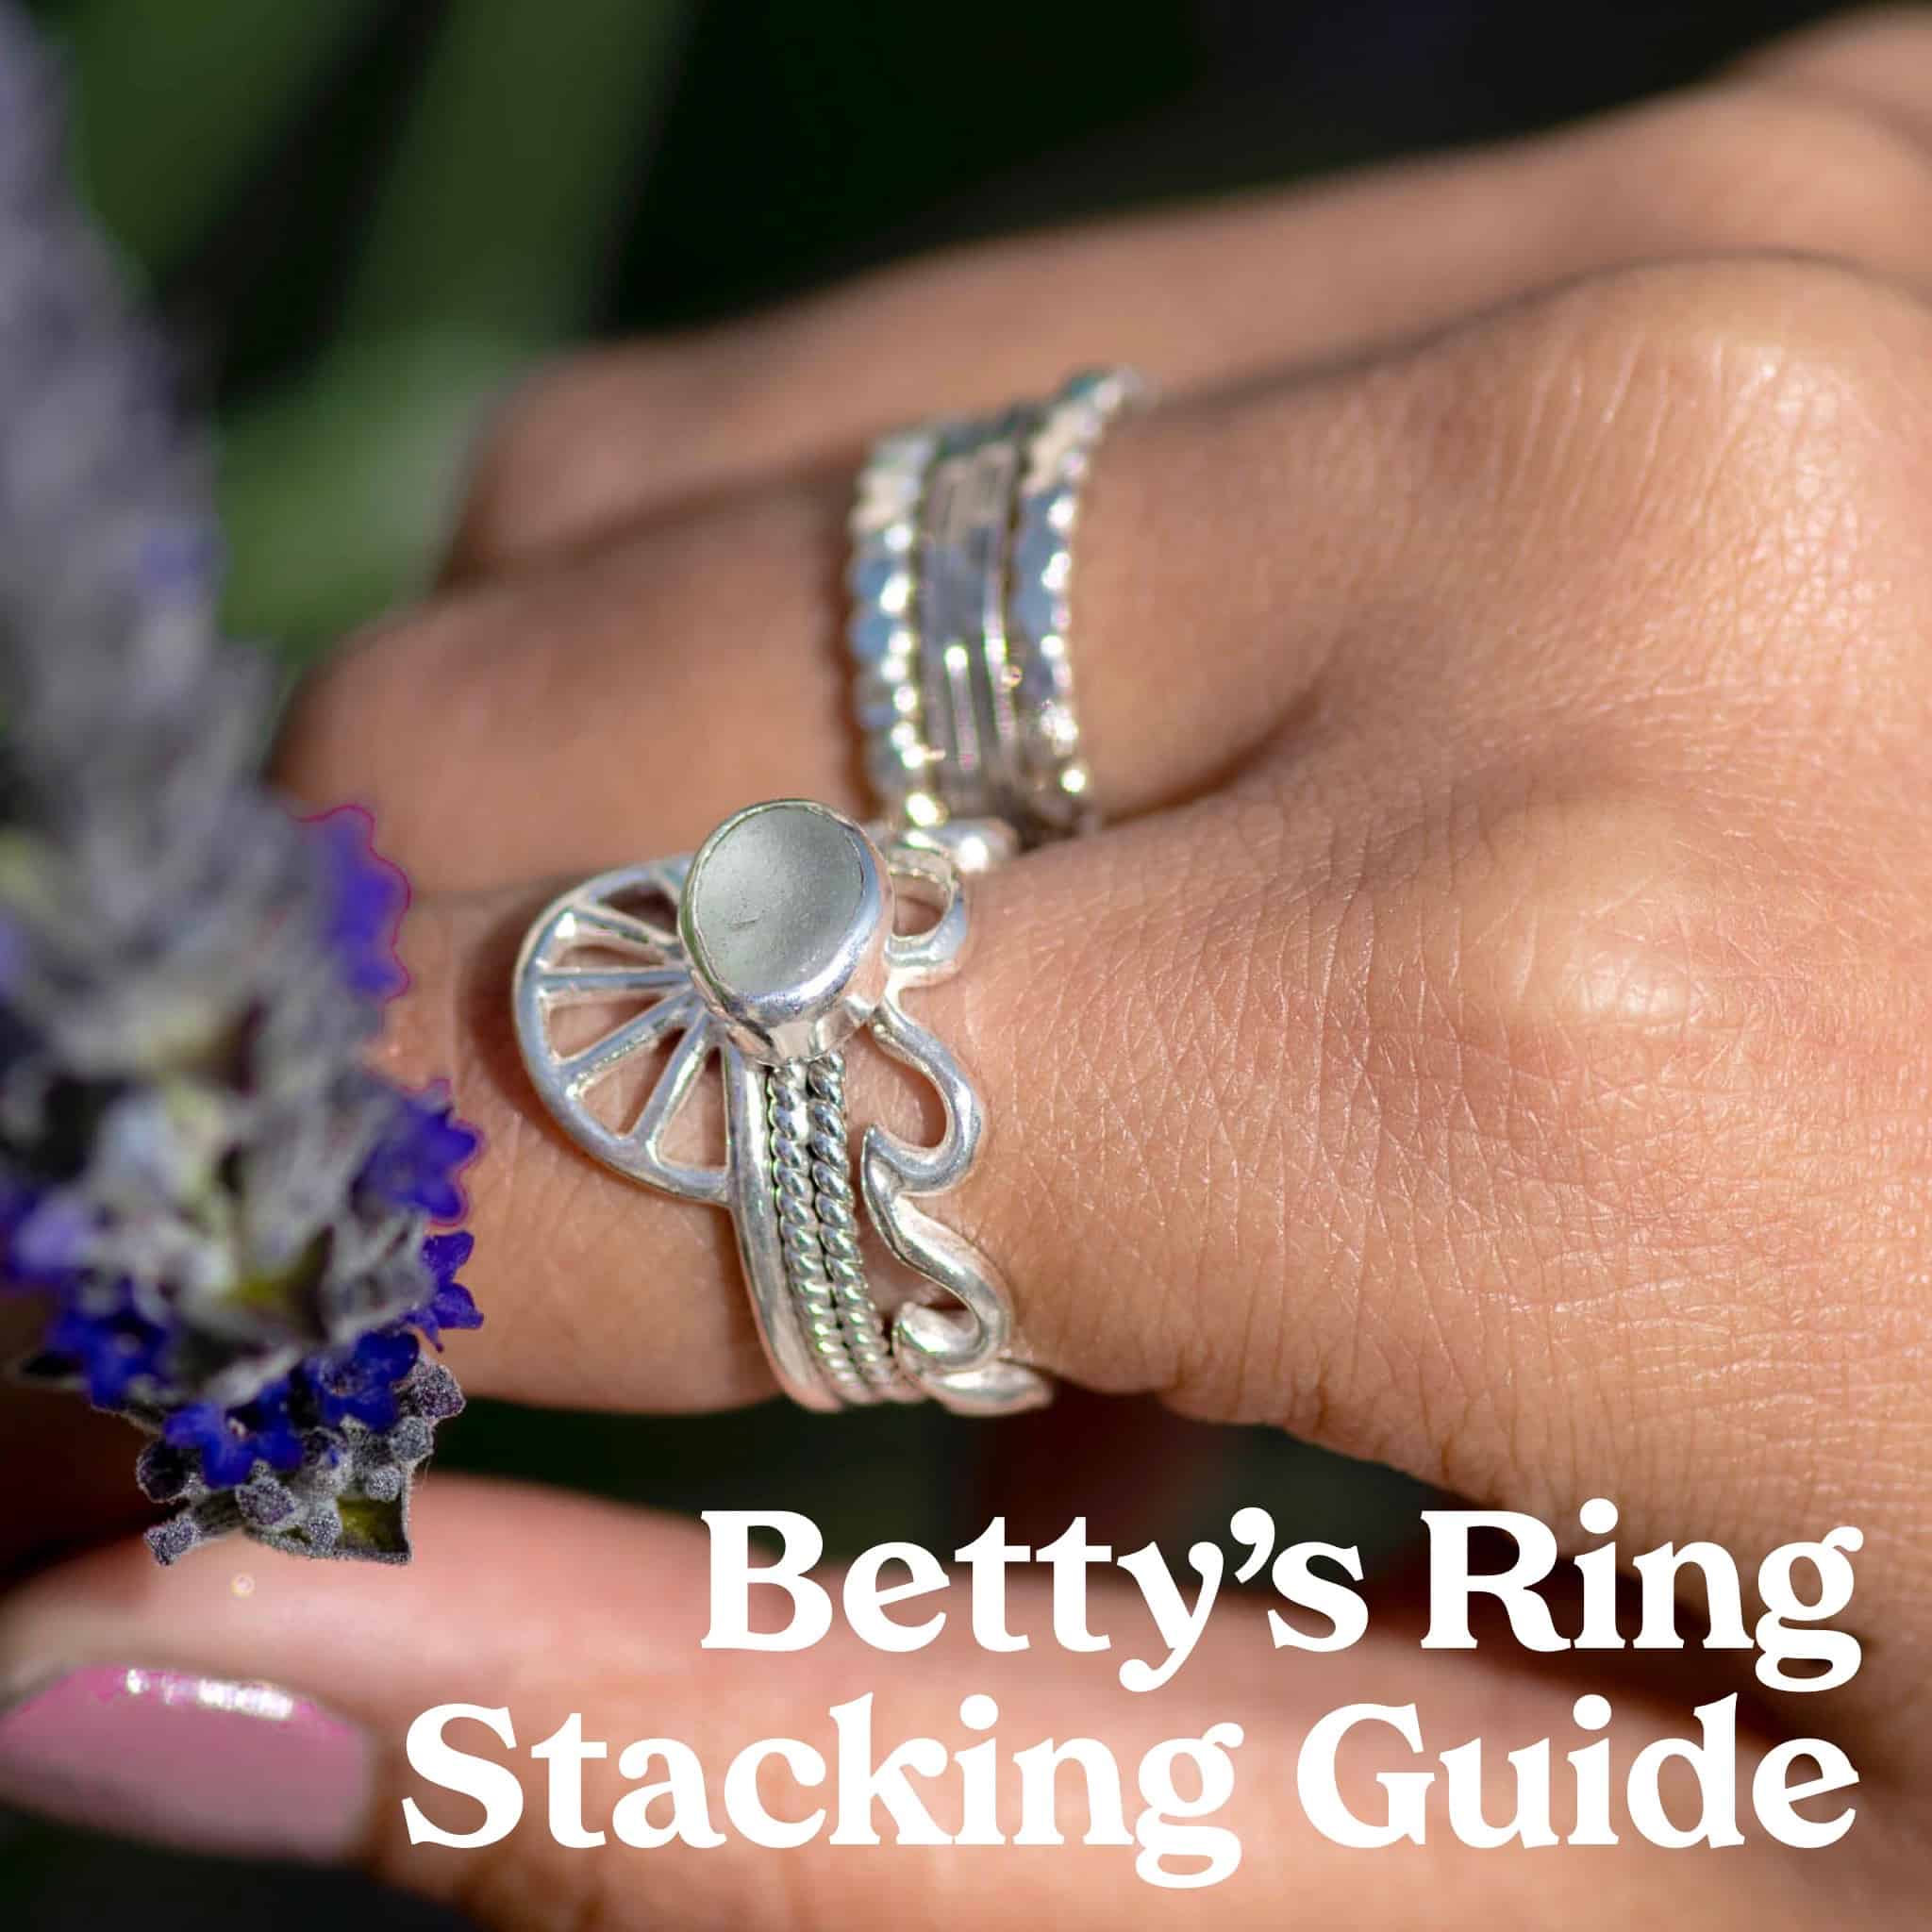 Betty's Ring Stacking Guide